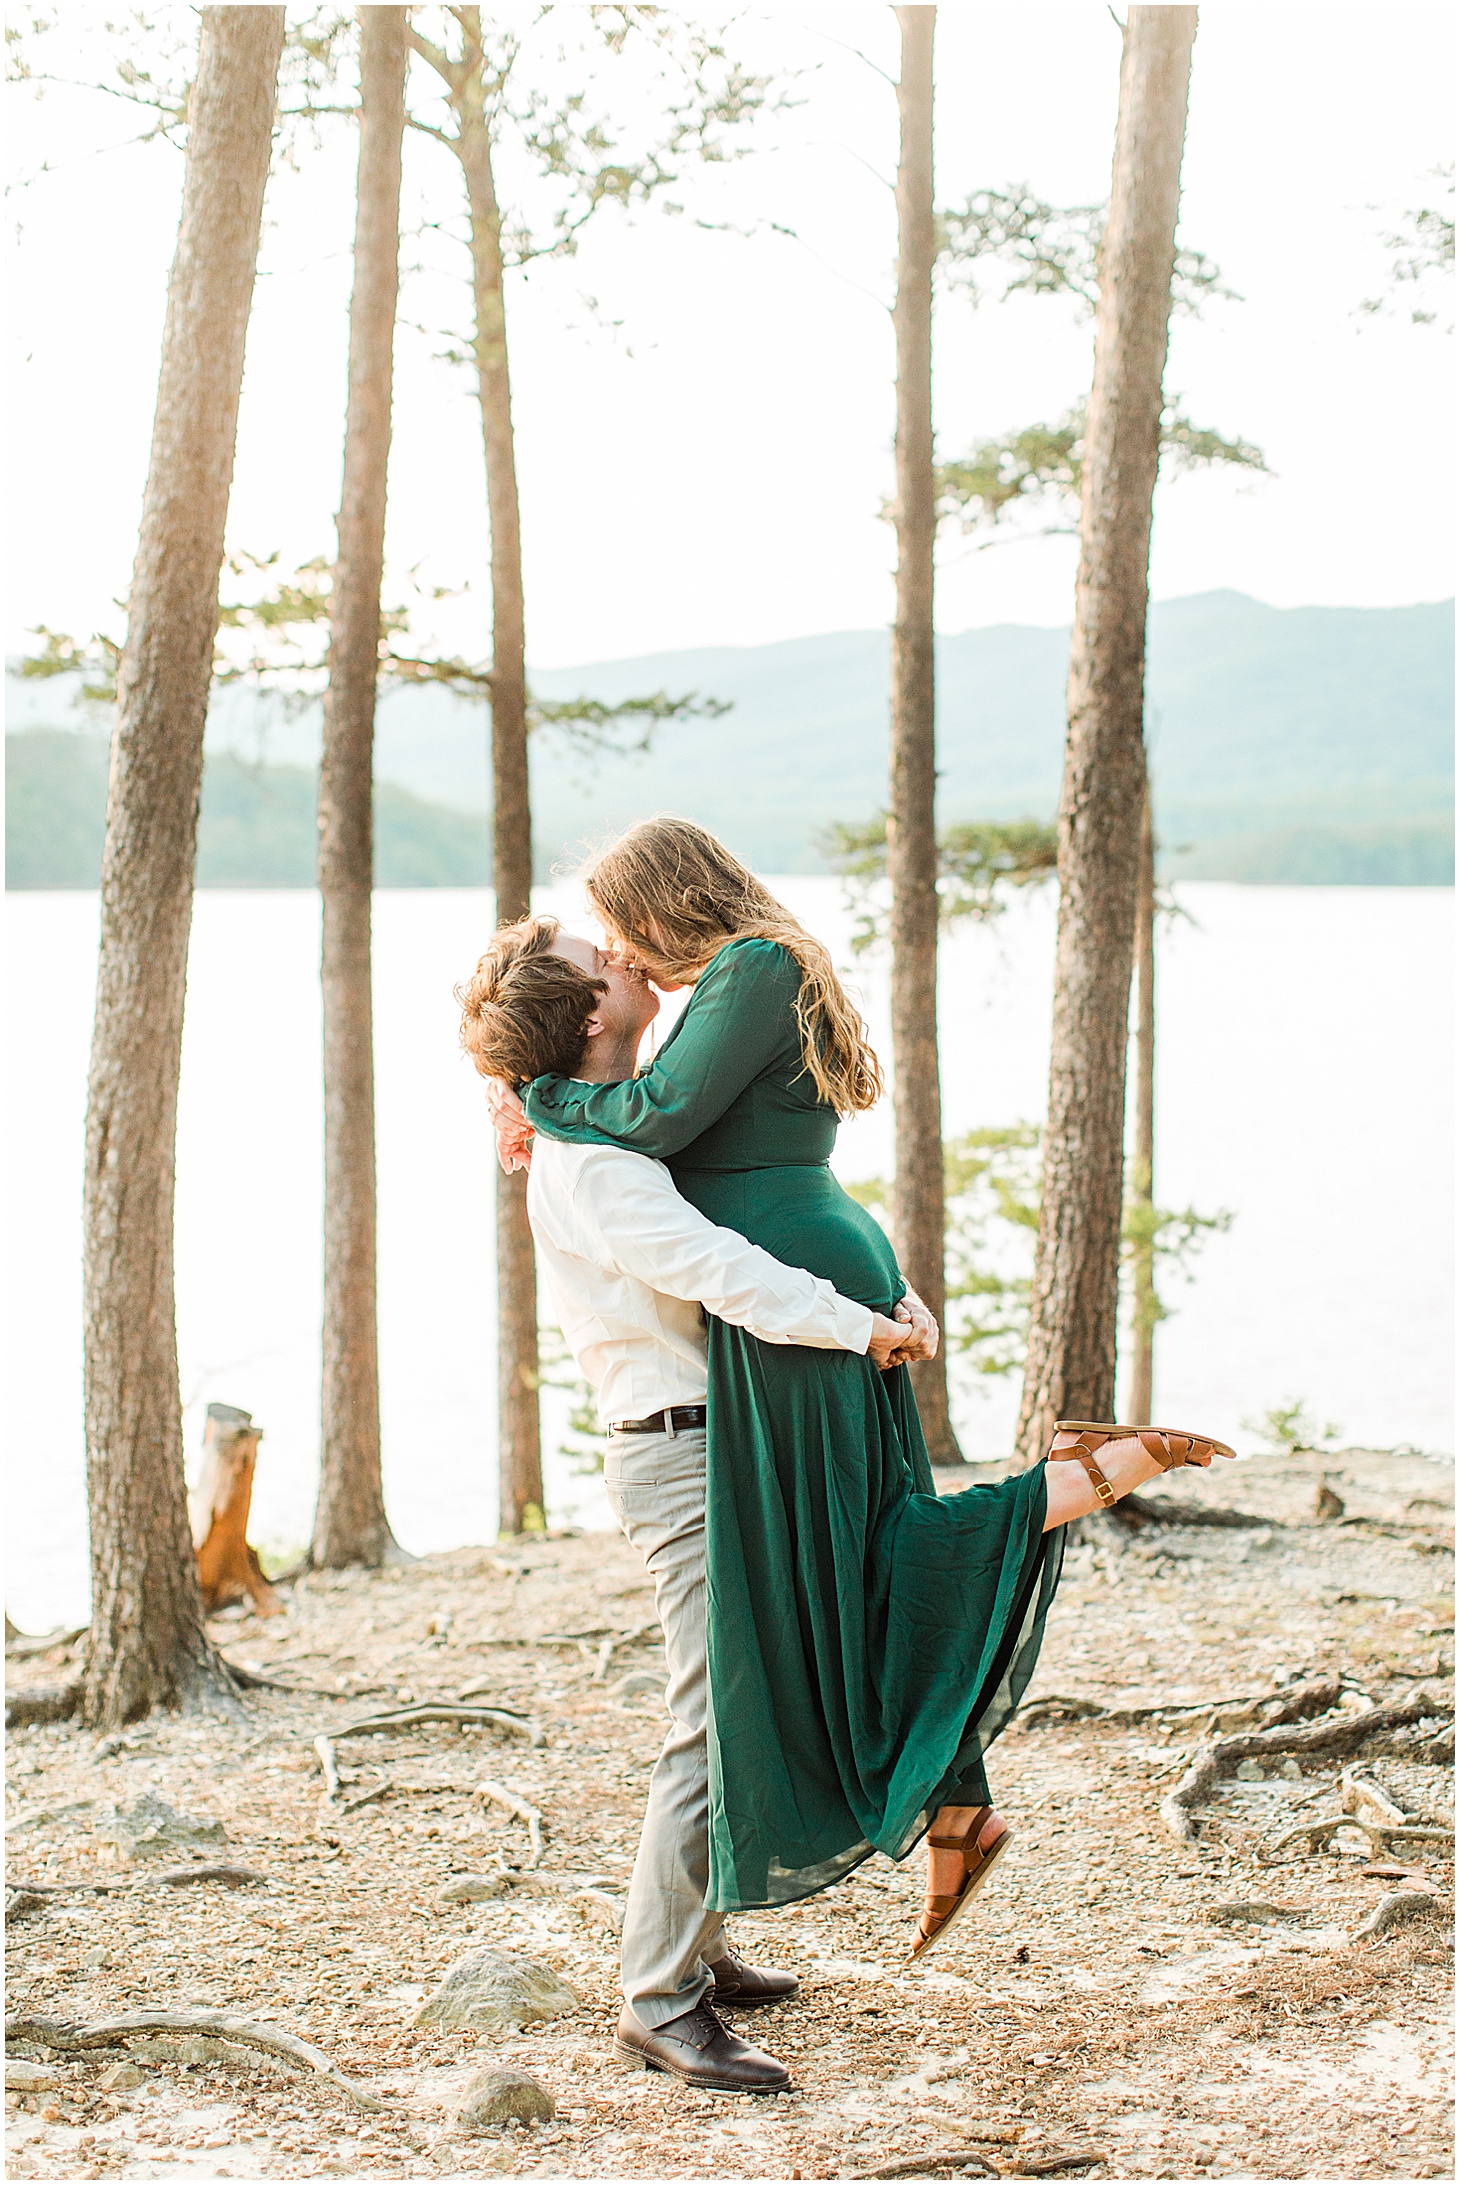 carvinscoveengagementsession_roanokeengagementsession_carvinscove_virginiawedding_virginiaweddingphotographer_vaweddingphotographer_photo_0064.jpg